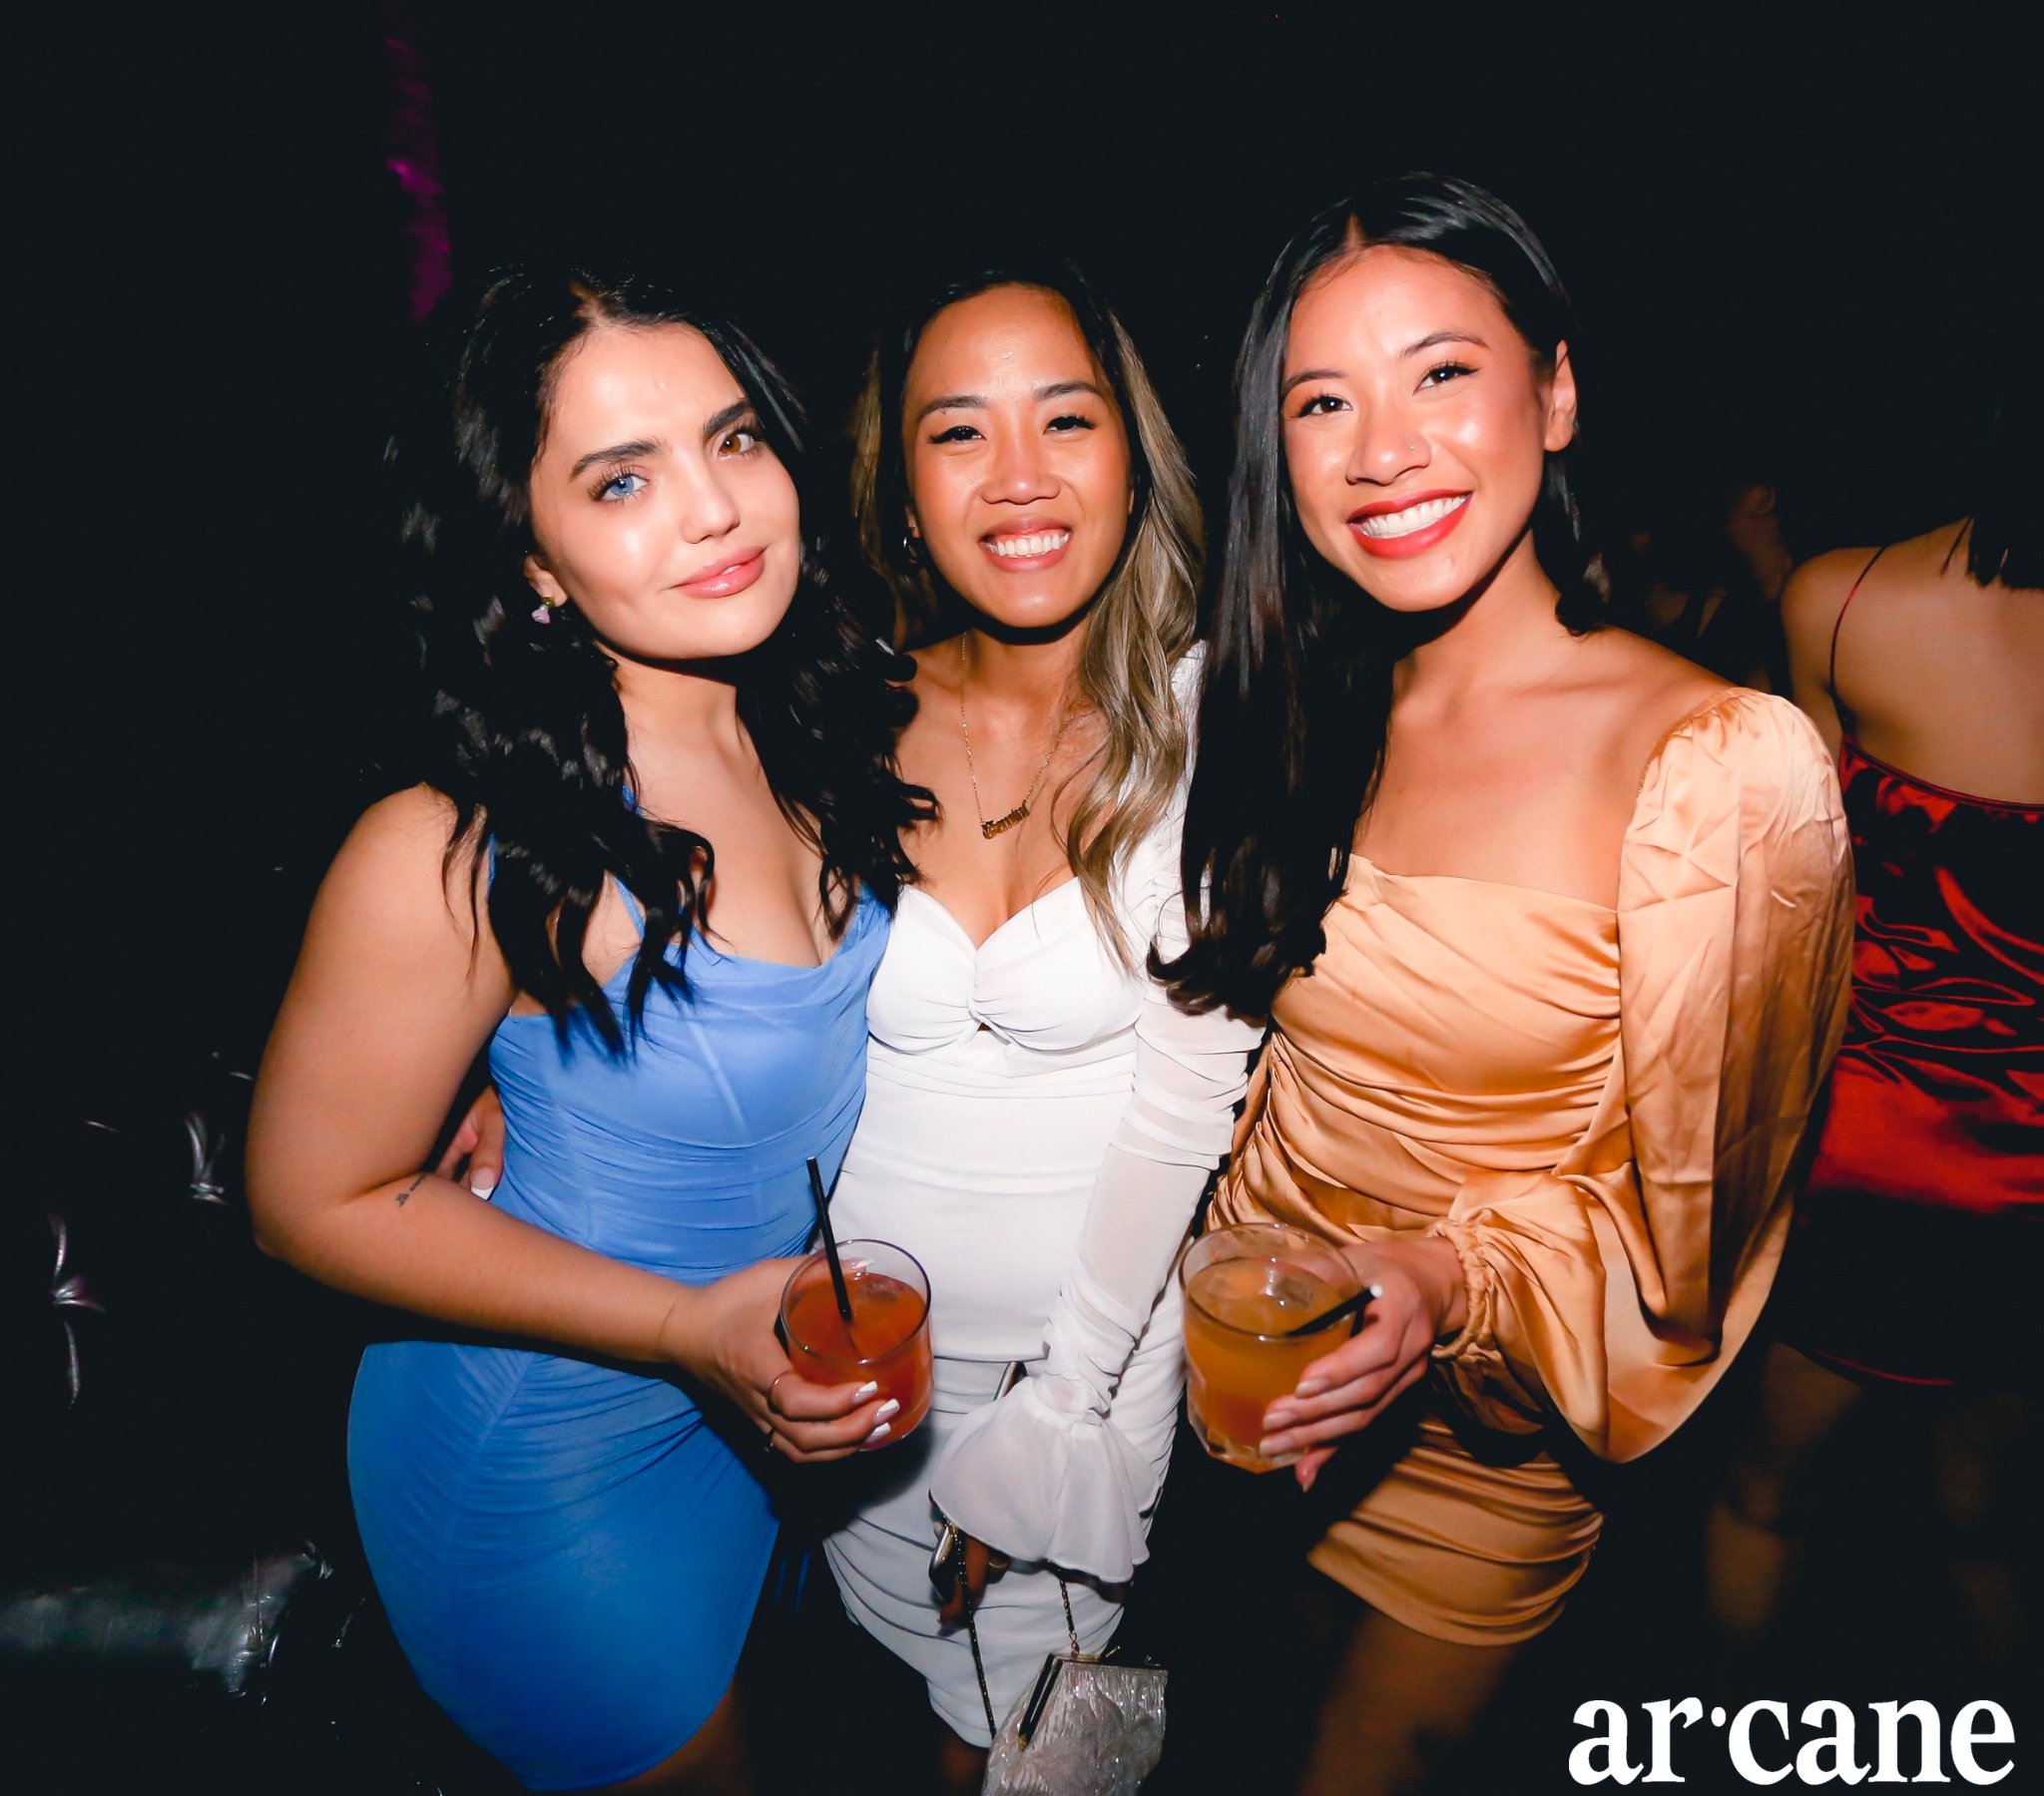 Toronto Nightlife and Clubs Nightlife City Guides foto foto